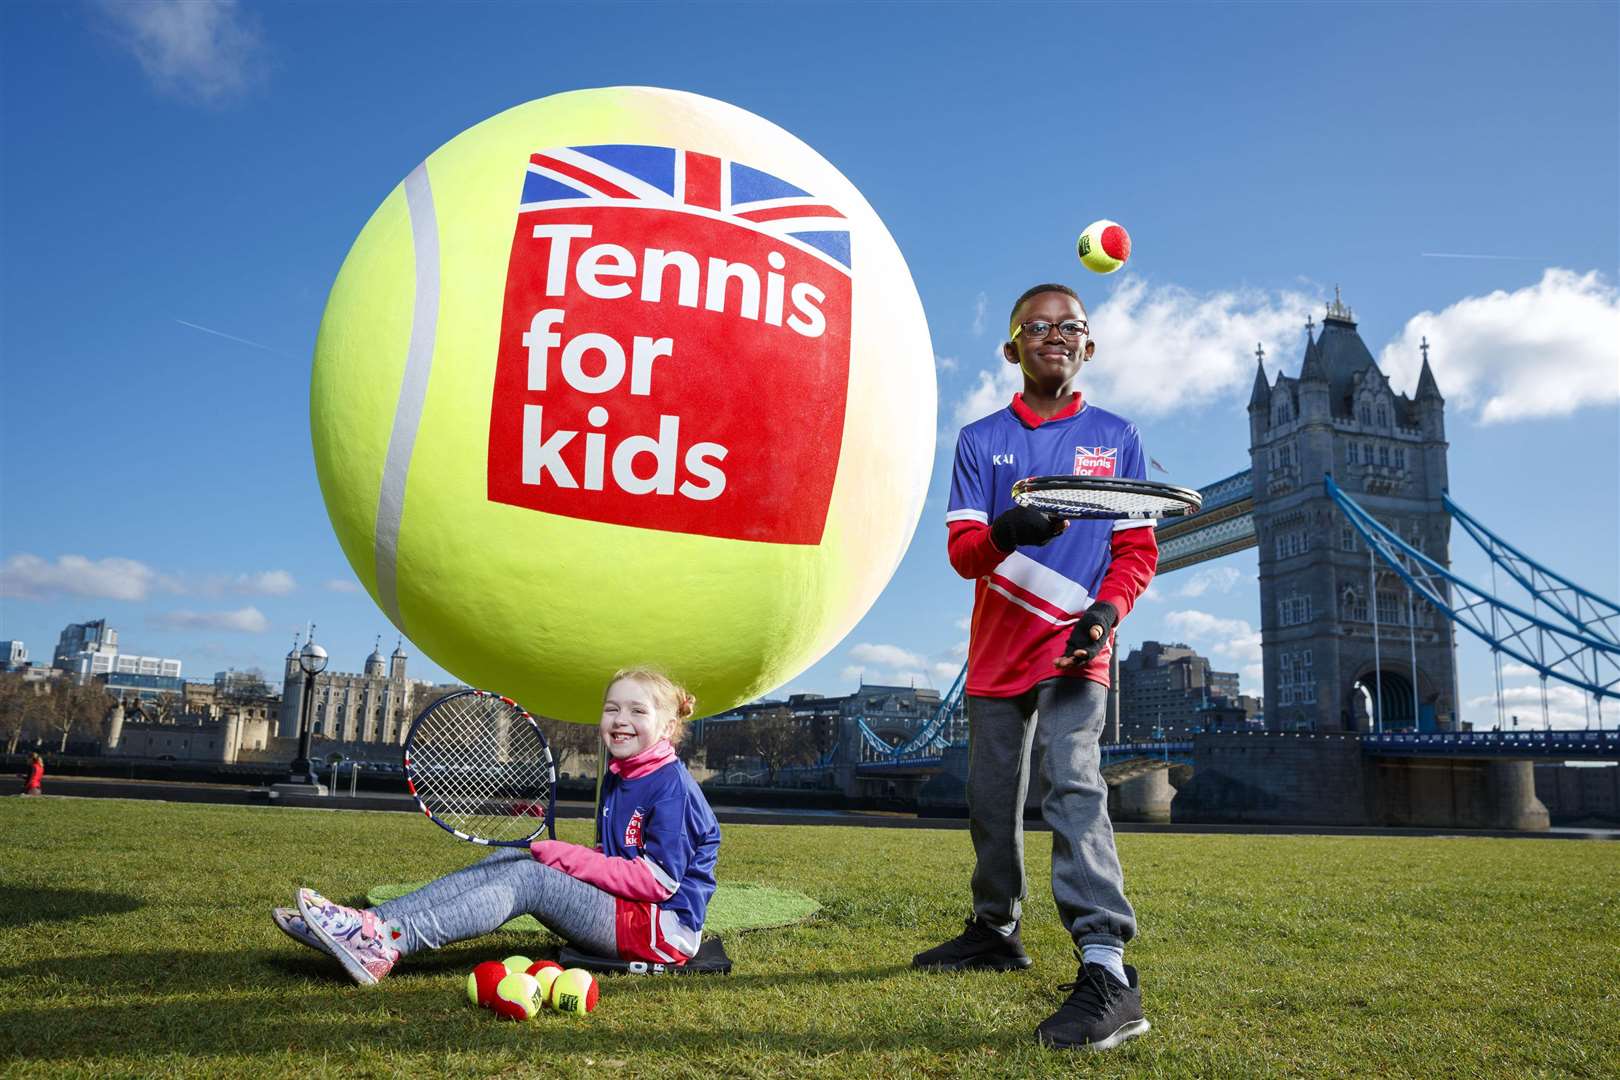 This summer the LTA is running the Tennis for Kids programme aimed at youngsters aged four to 11